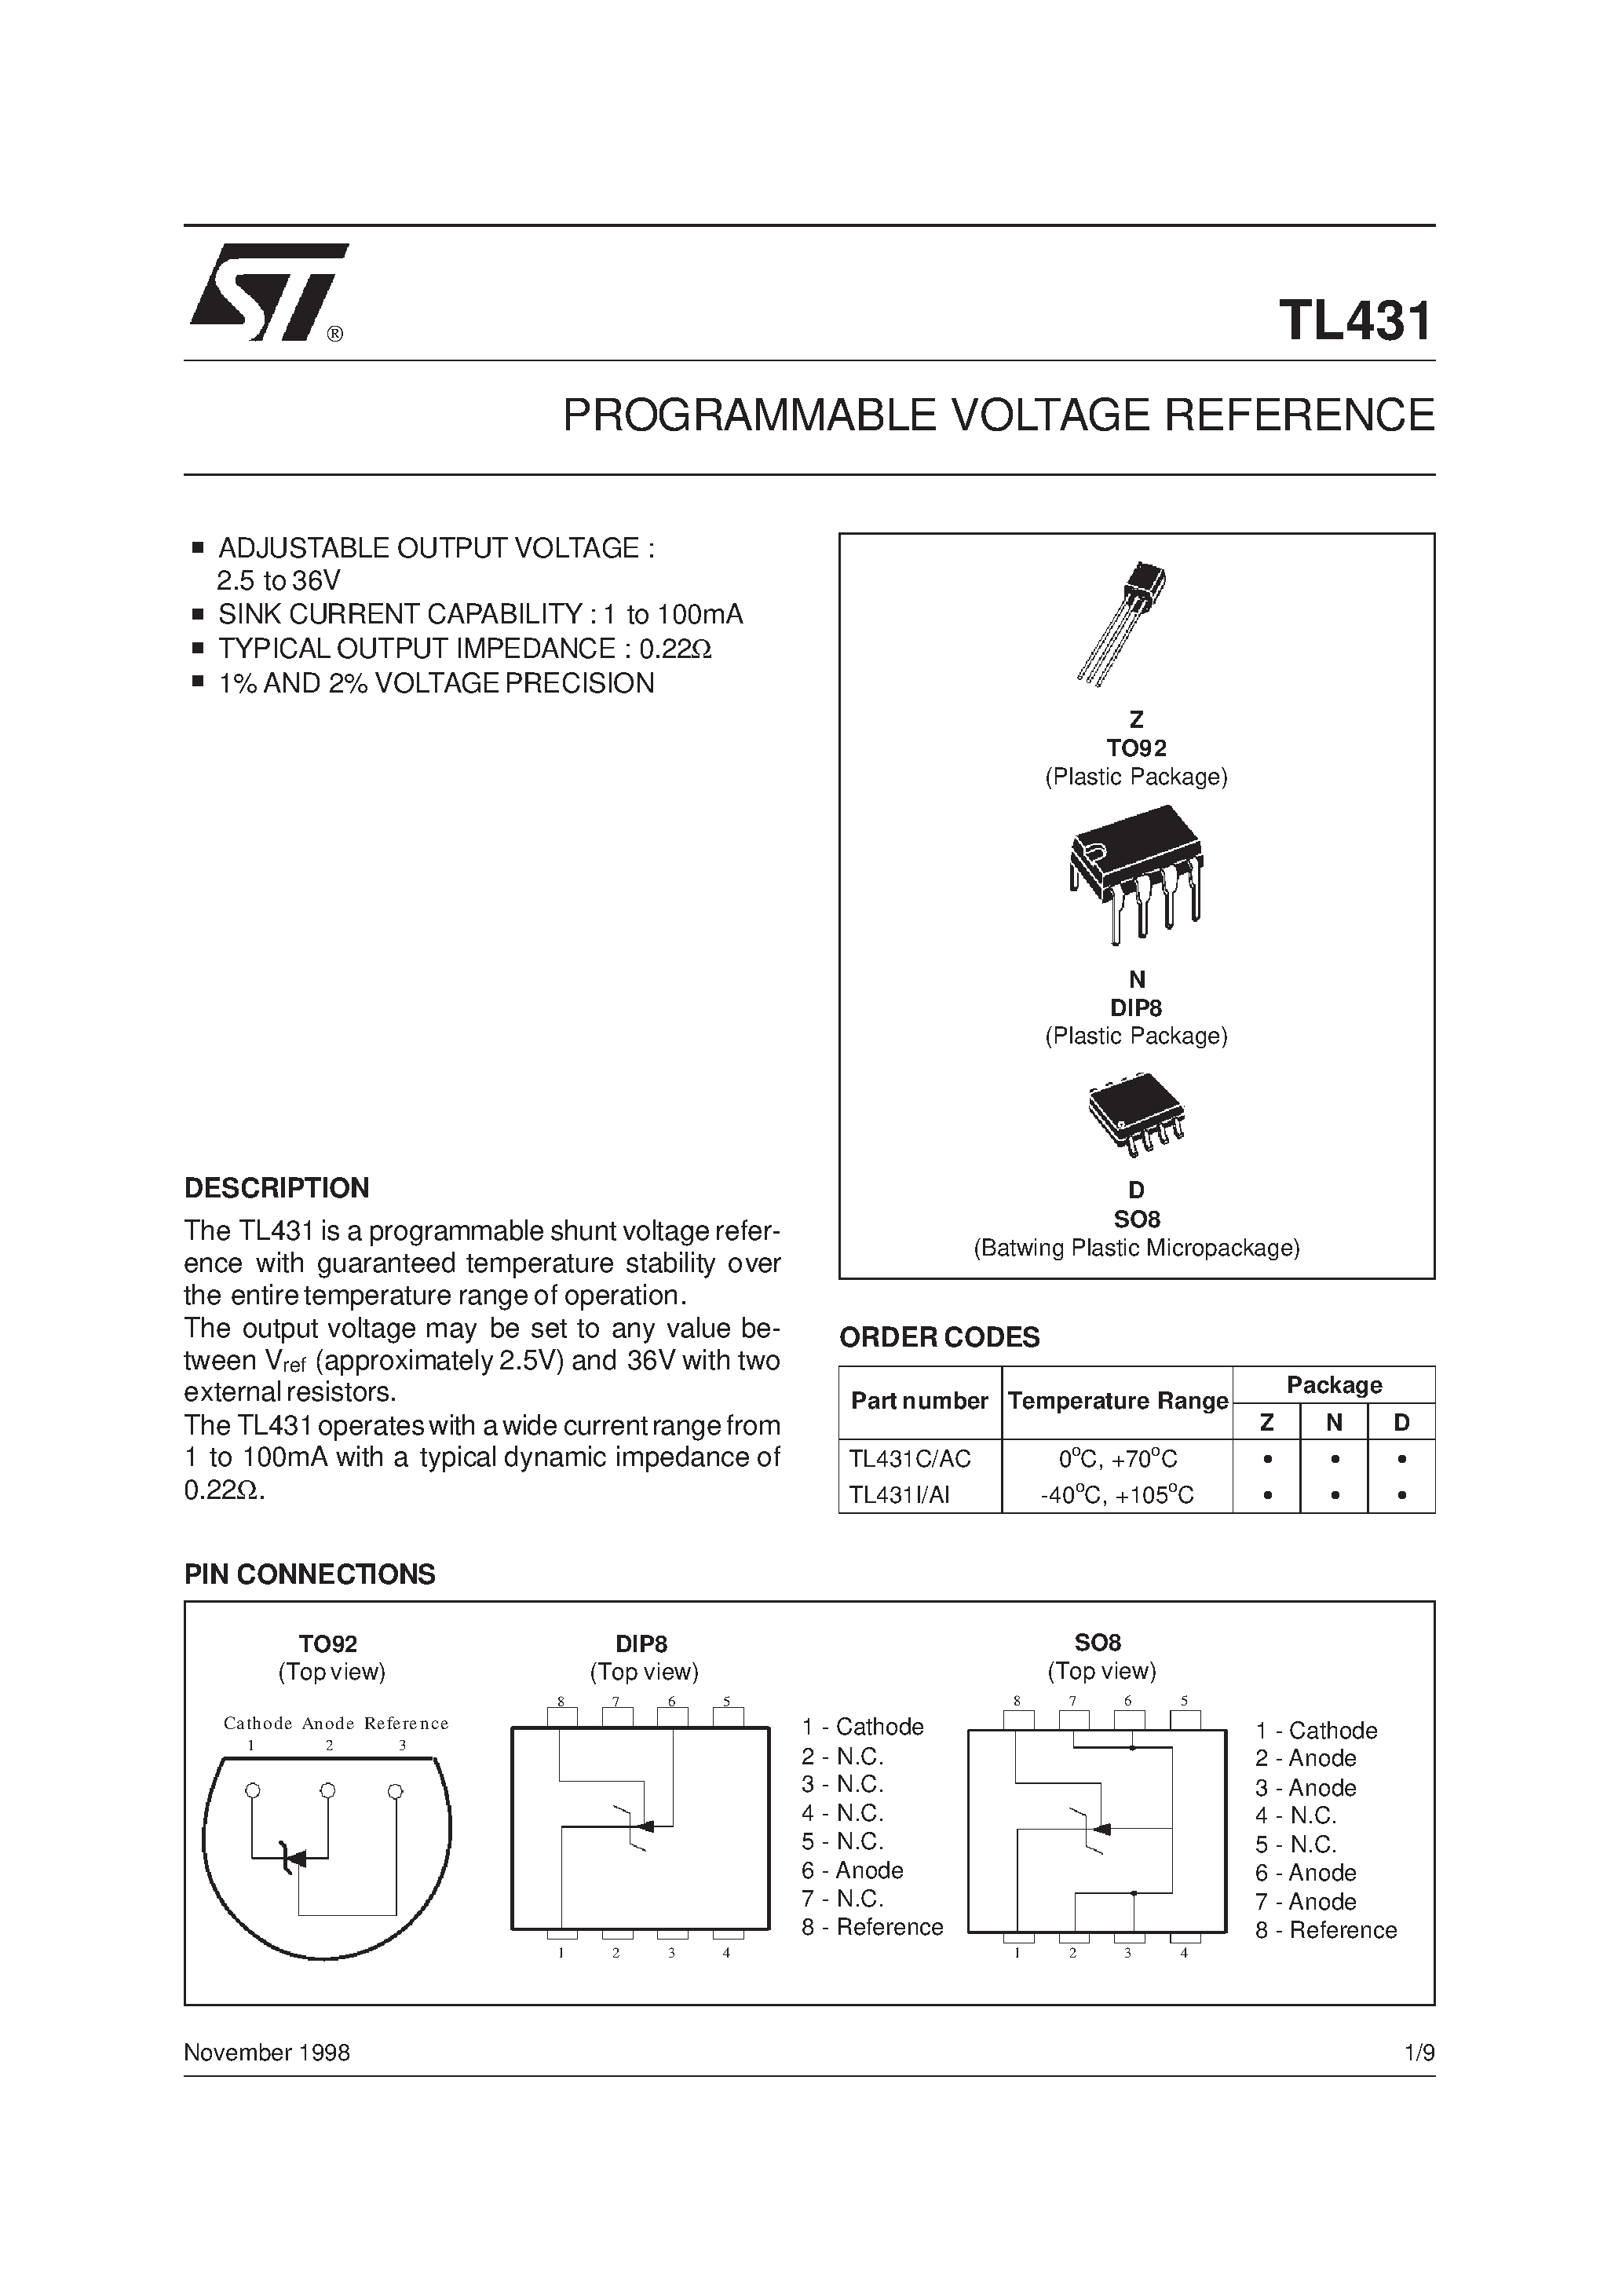 Даташит TL431 - PROGRAMMABLE VOLTAGE REFERENCE страница 1